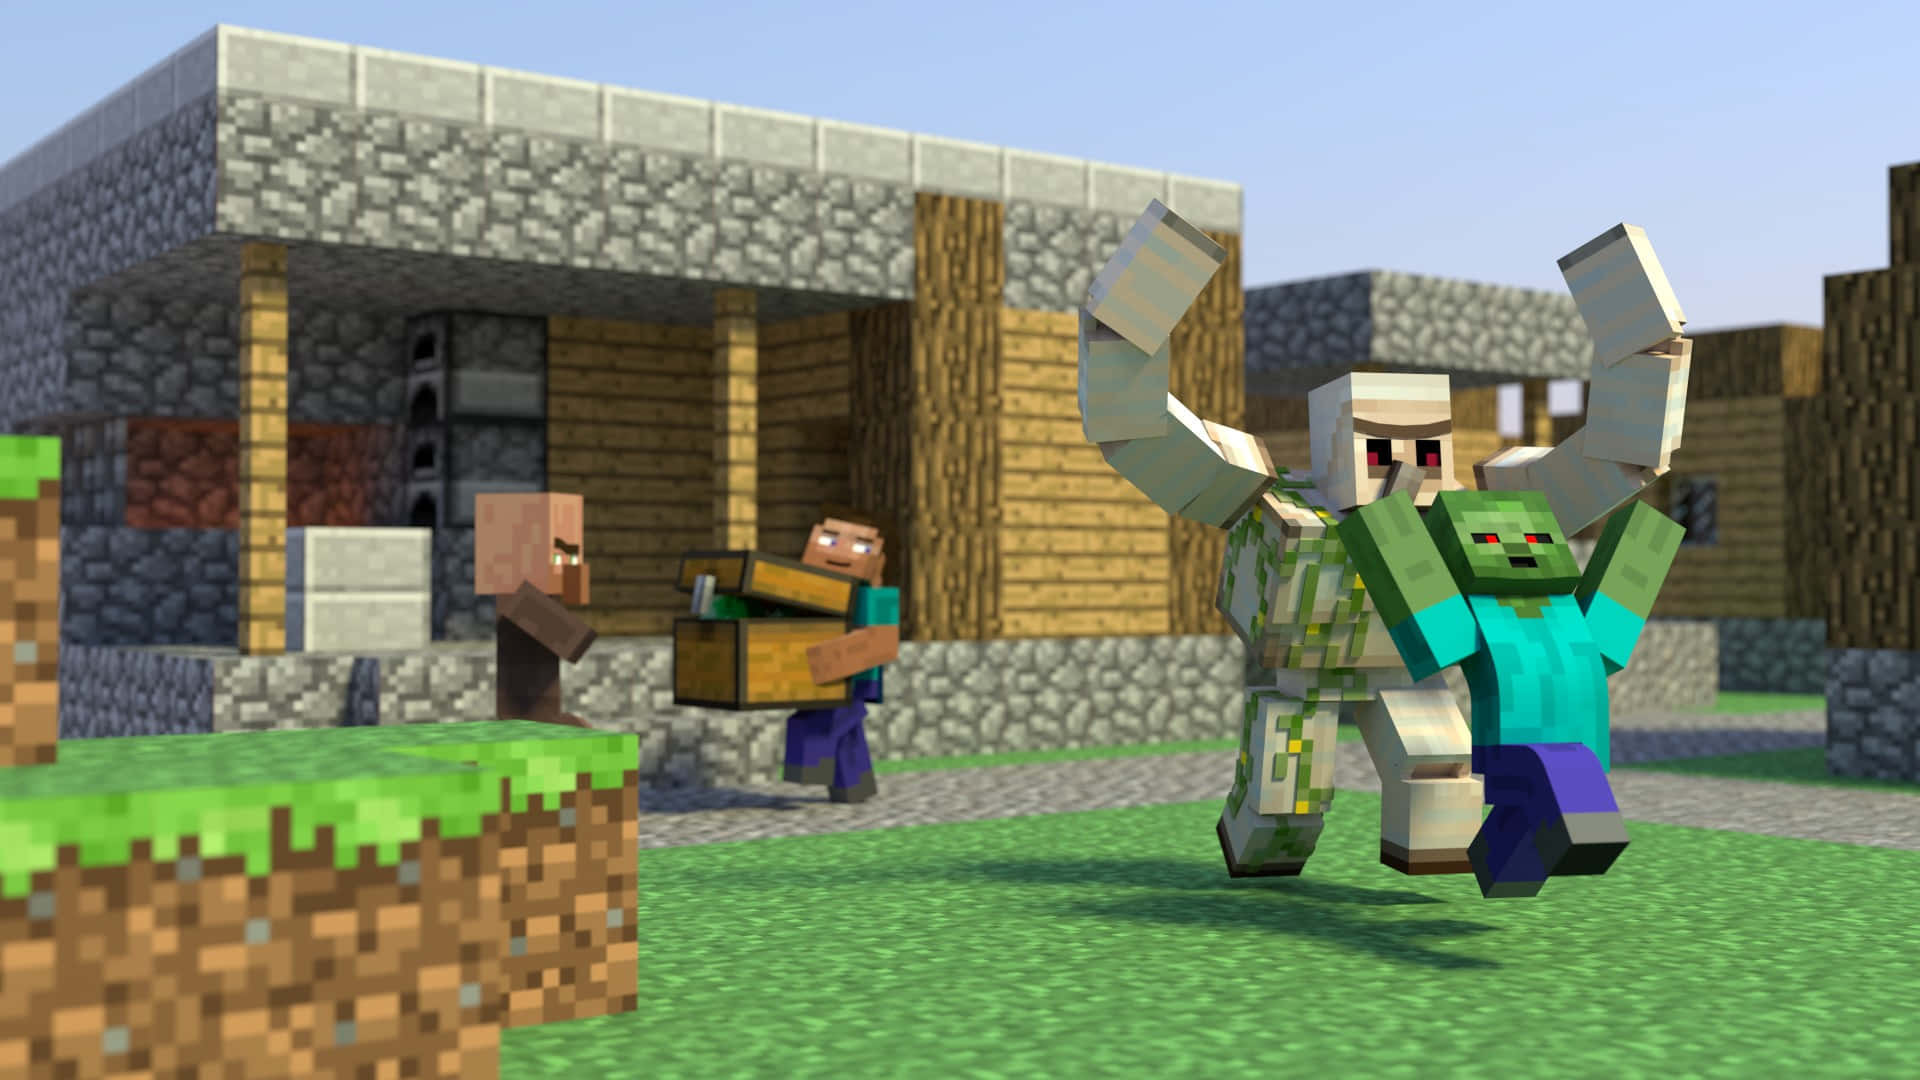 Mighty Iron Golem protects a village in Minecraft Wallpaper